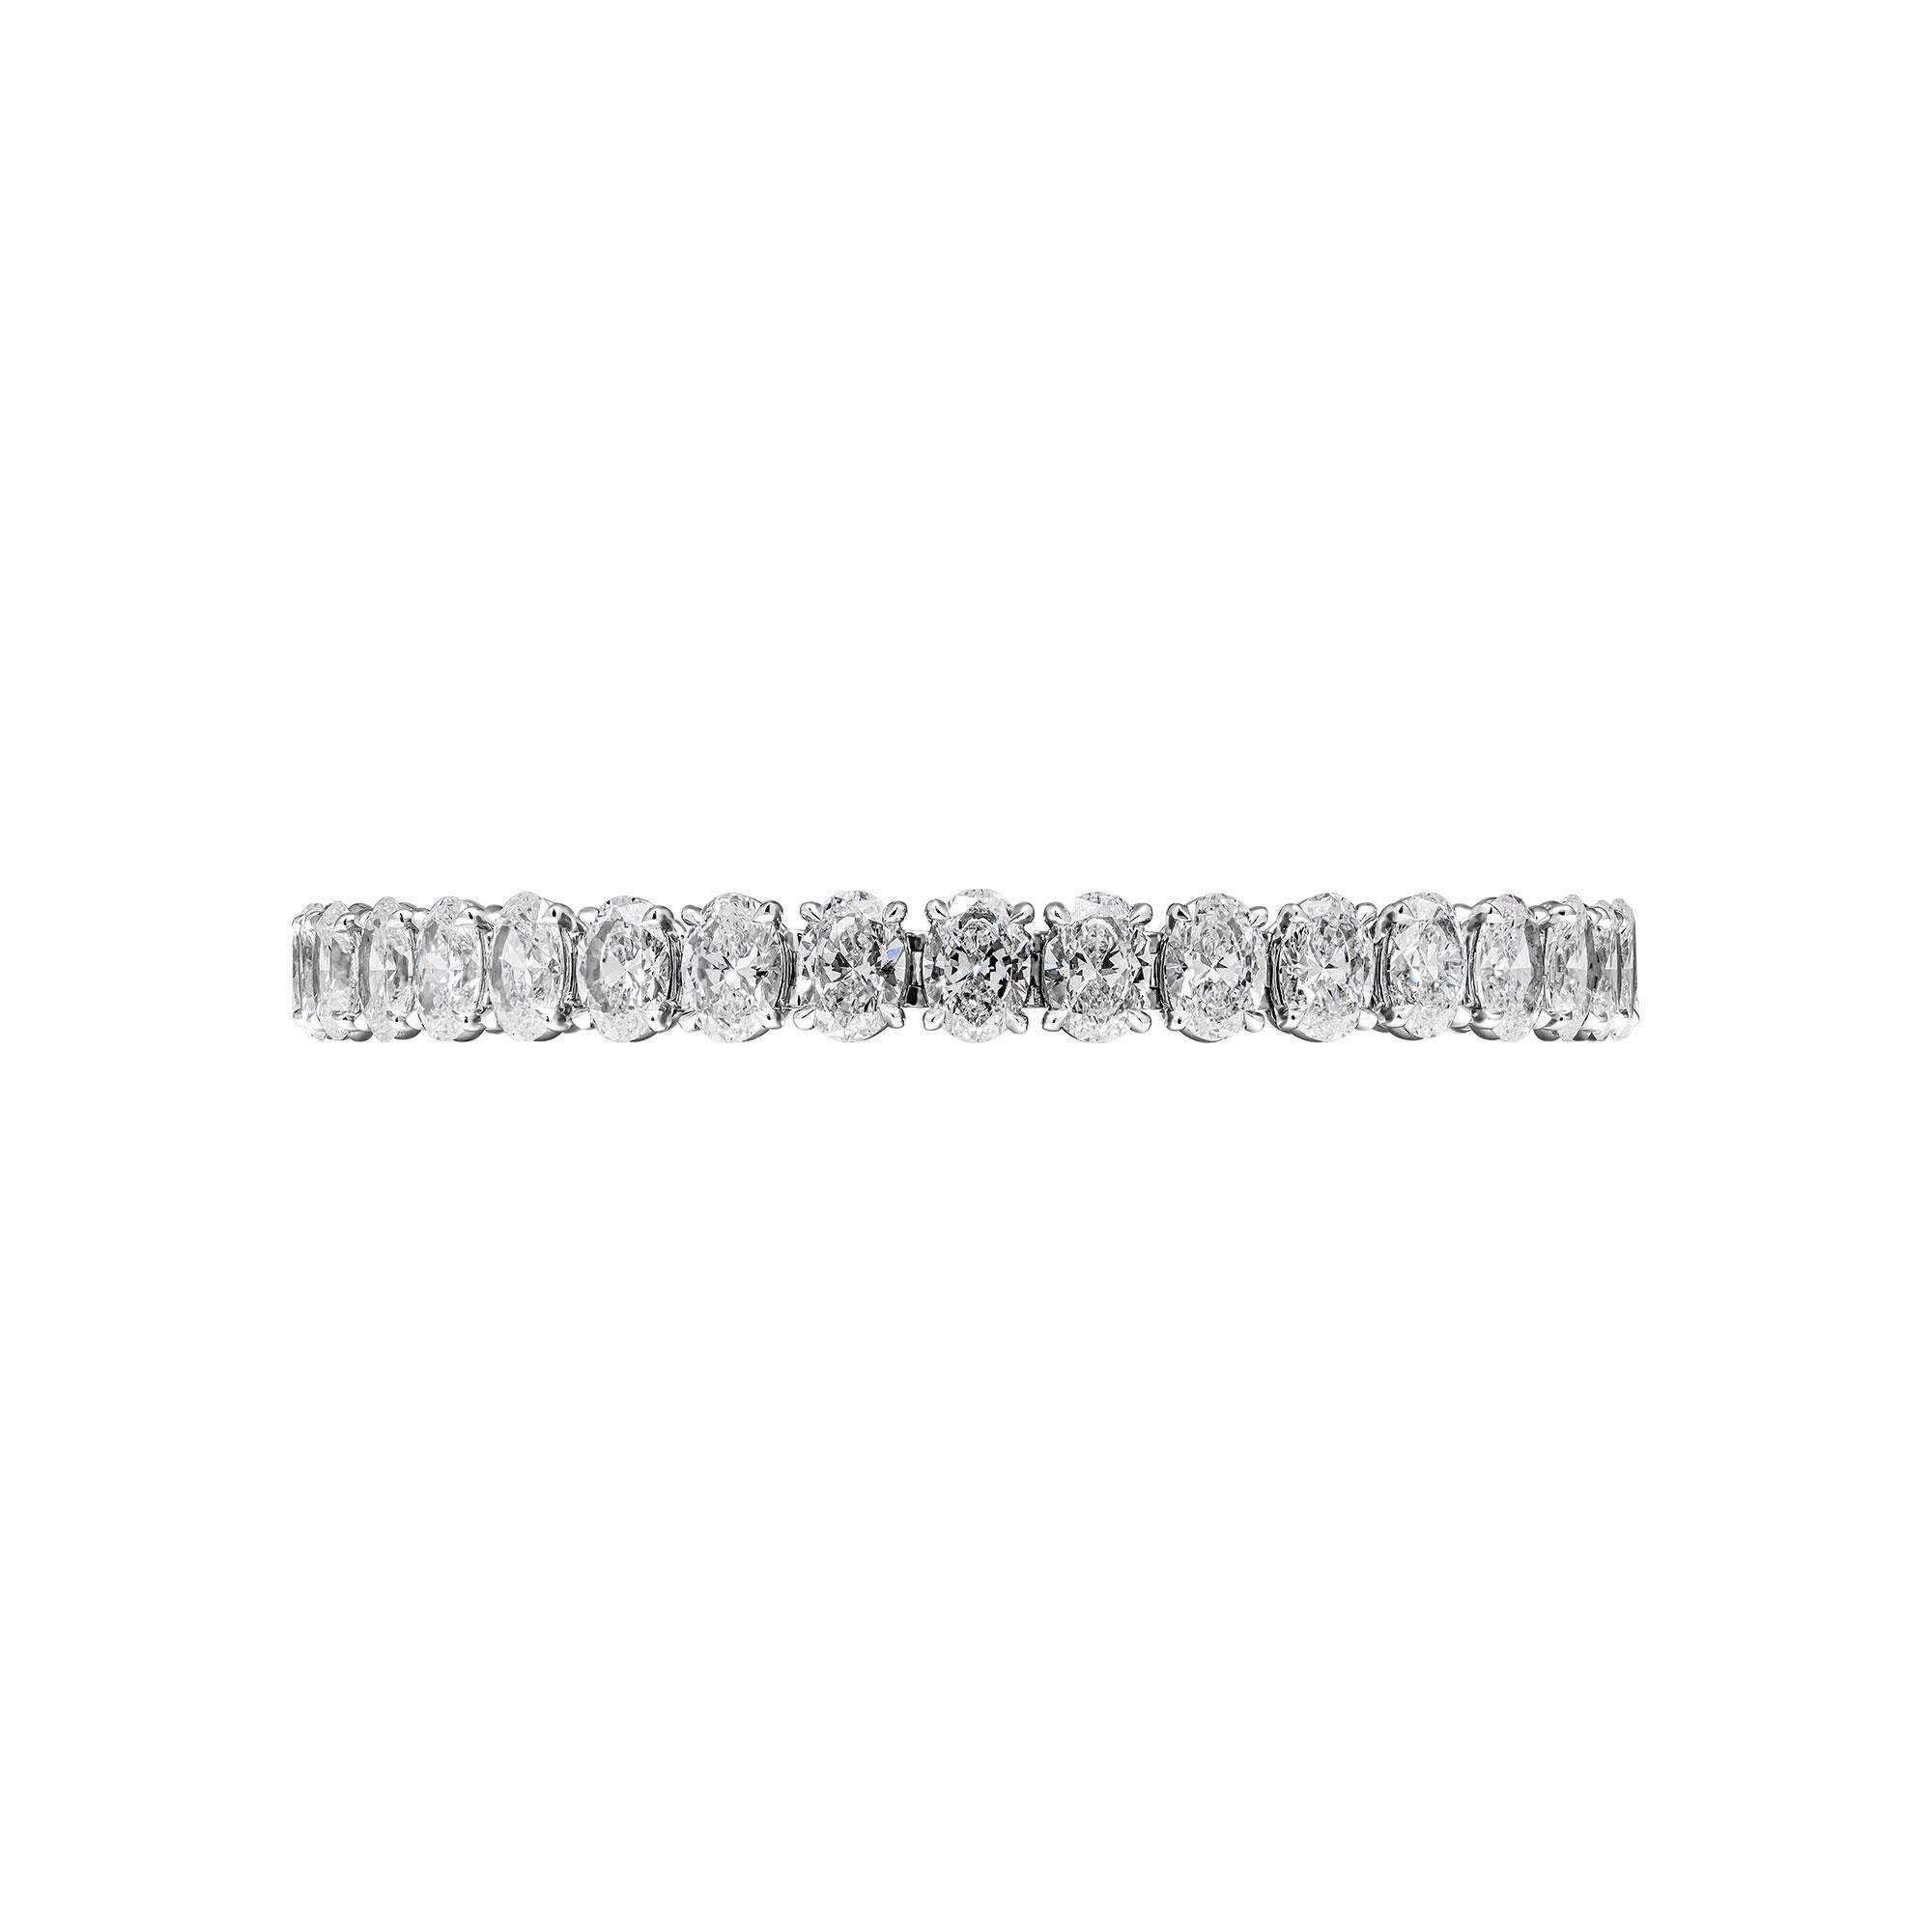 Diamond Tennis Bracelet
Timeless and classic! Not your typical tennis bracelet - ovals bring nice elegant touch and look twice bigger then round diamonds - truly a statement piece
Mounted in Platinum with 37 Oval diamonds - each one GIA certified -